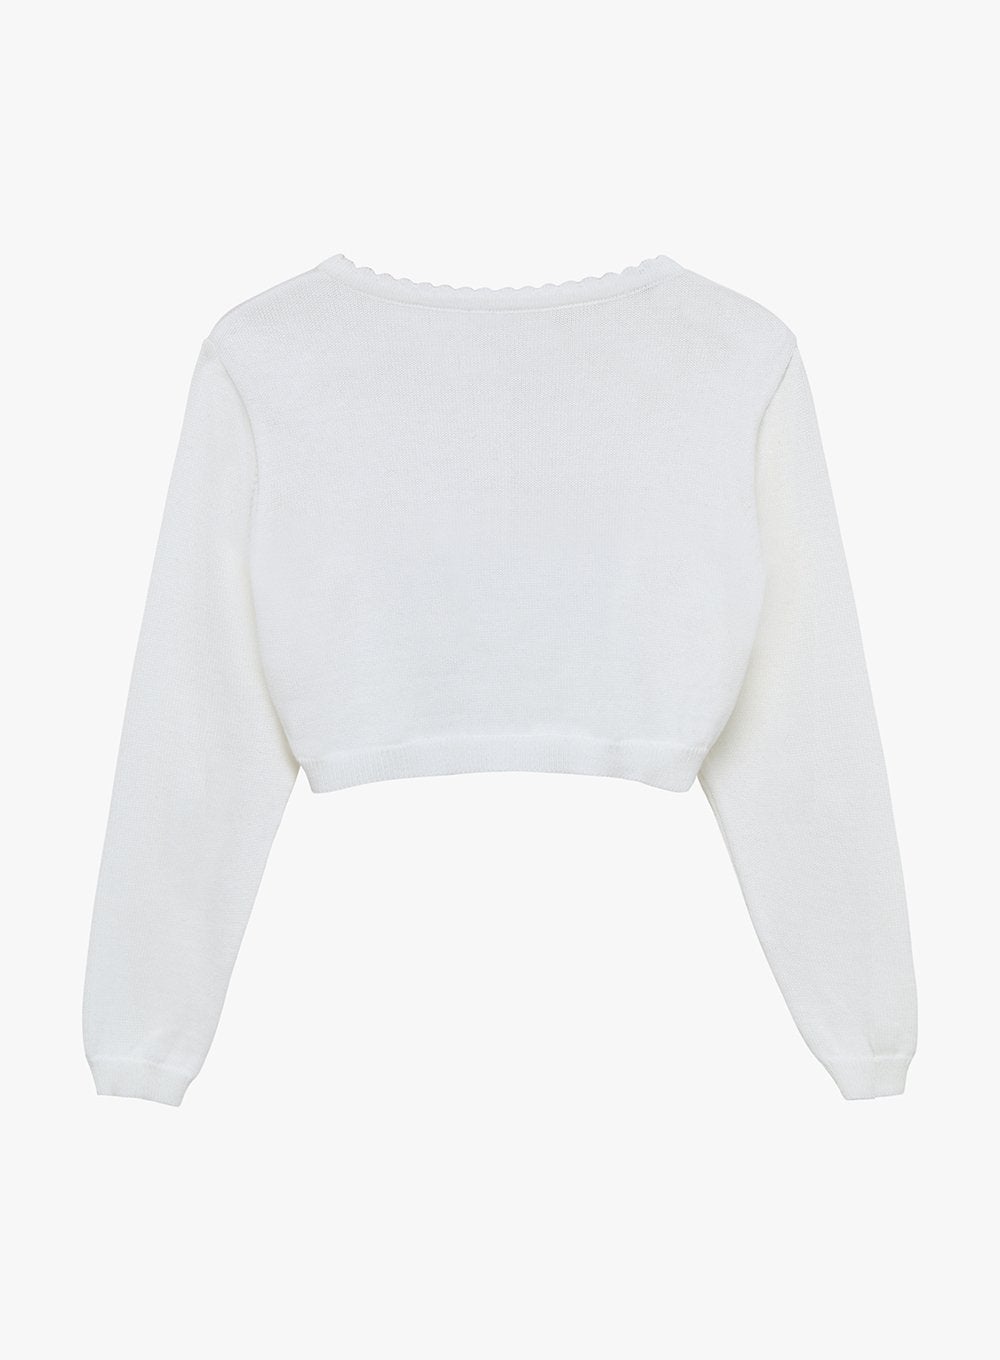 Confiture Cardigan Sophie Cropped Cardigan in White